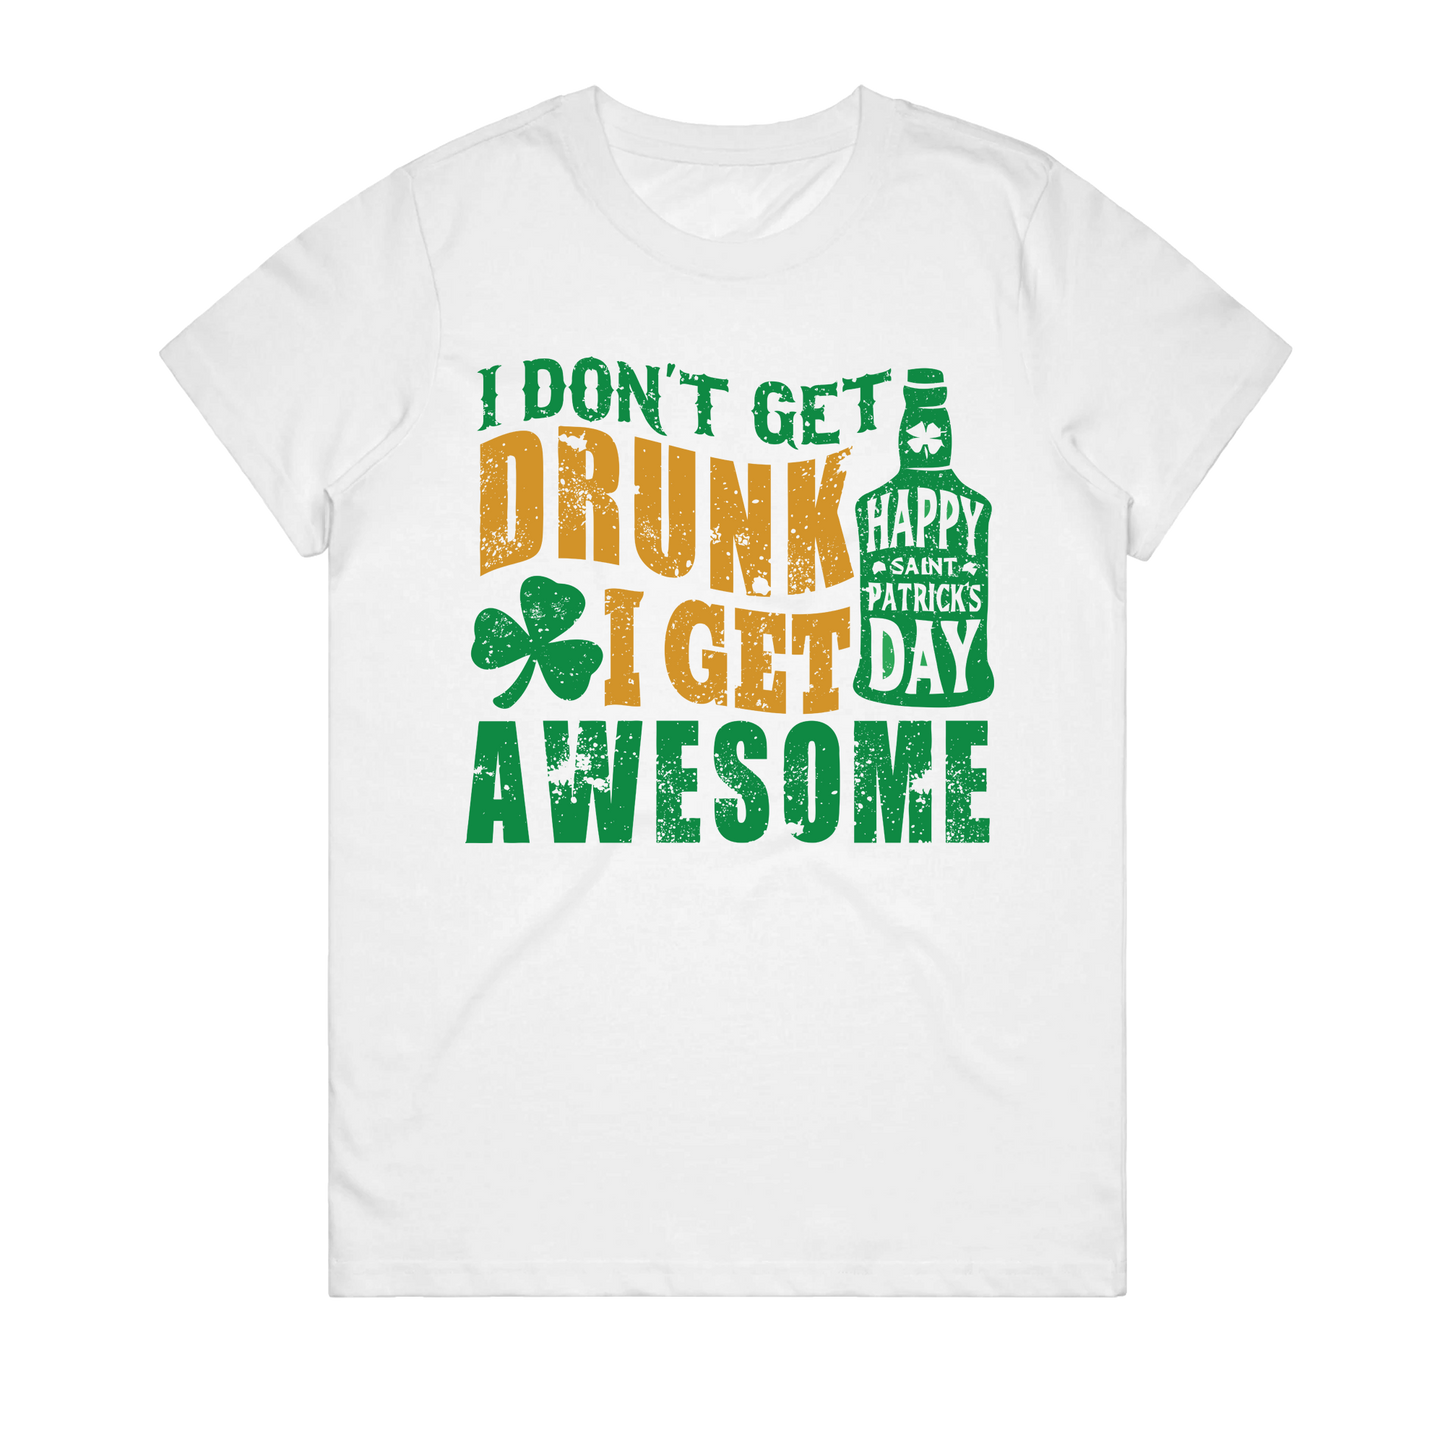 Women's T-Shirt – I Get Awesome